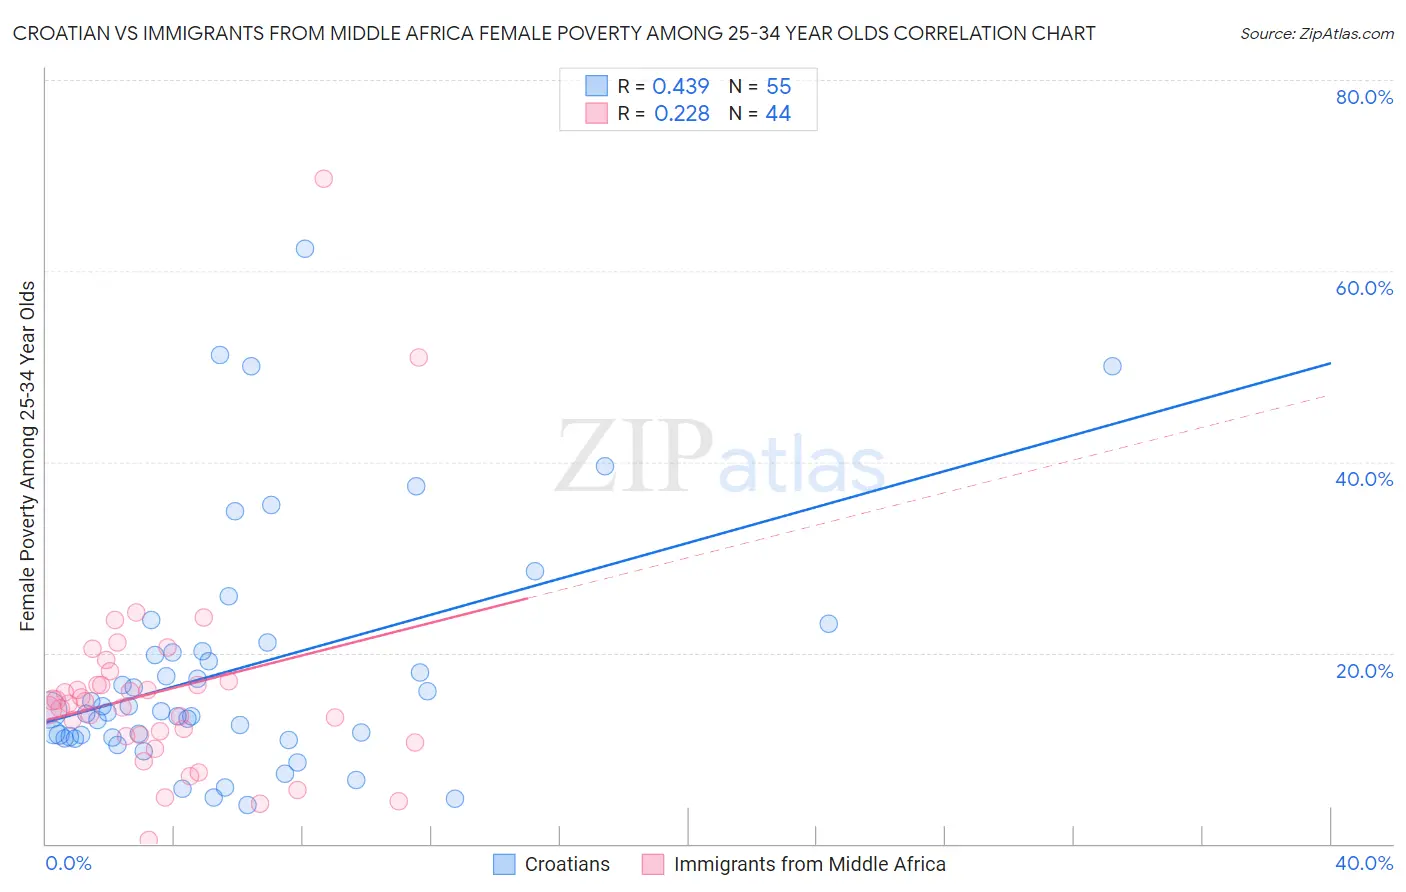 Croatian vs Immigrants from Middle Africa Female Poverty Among 25-34 Year Olds